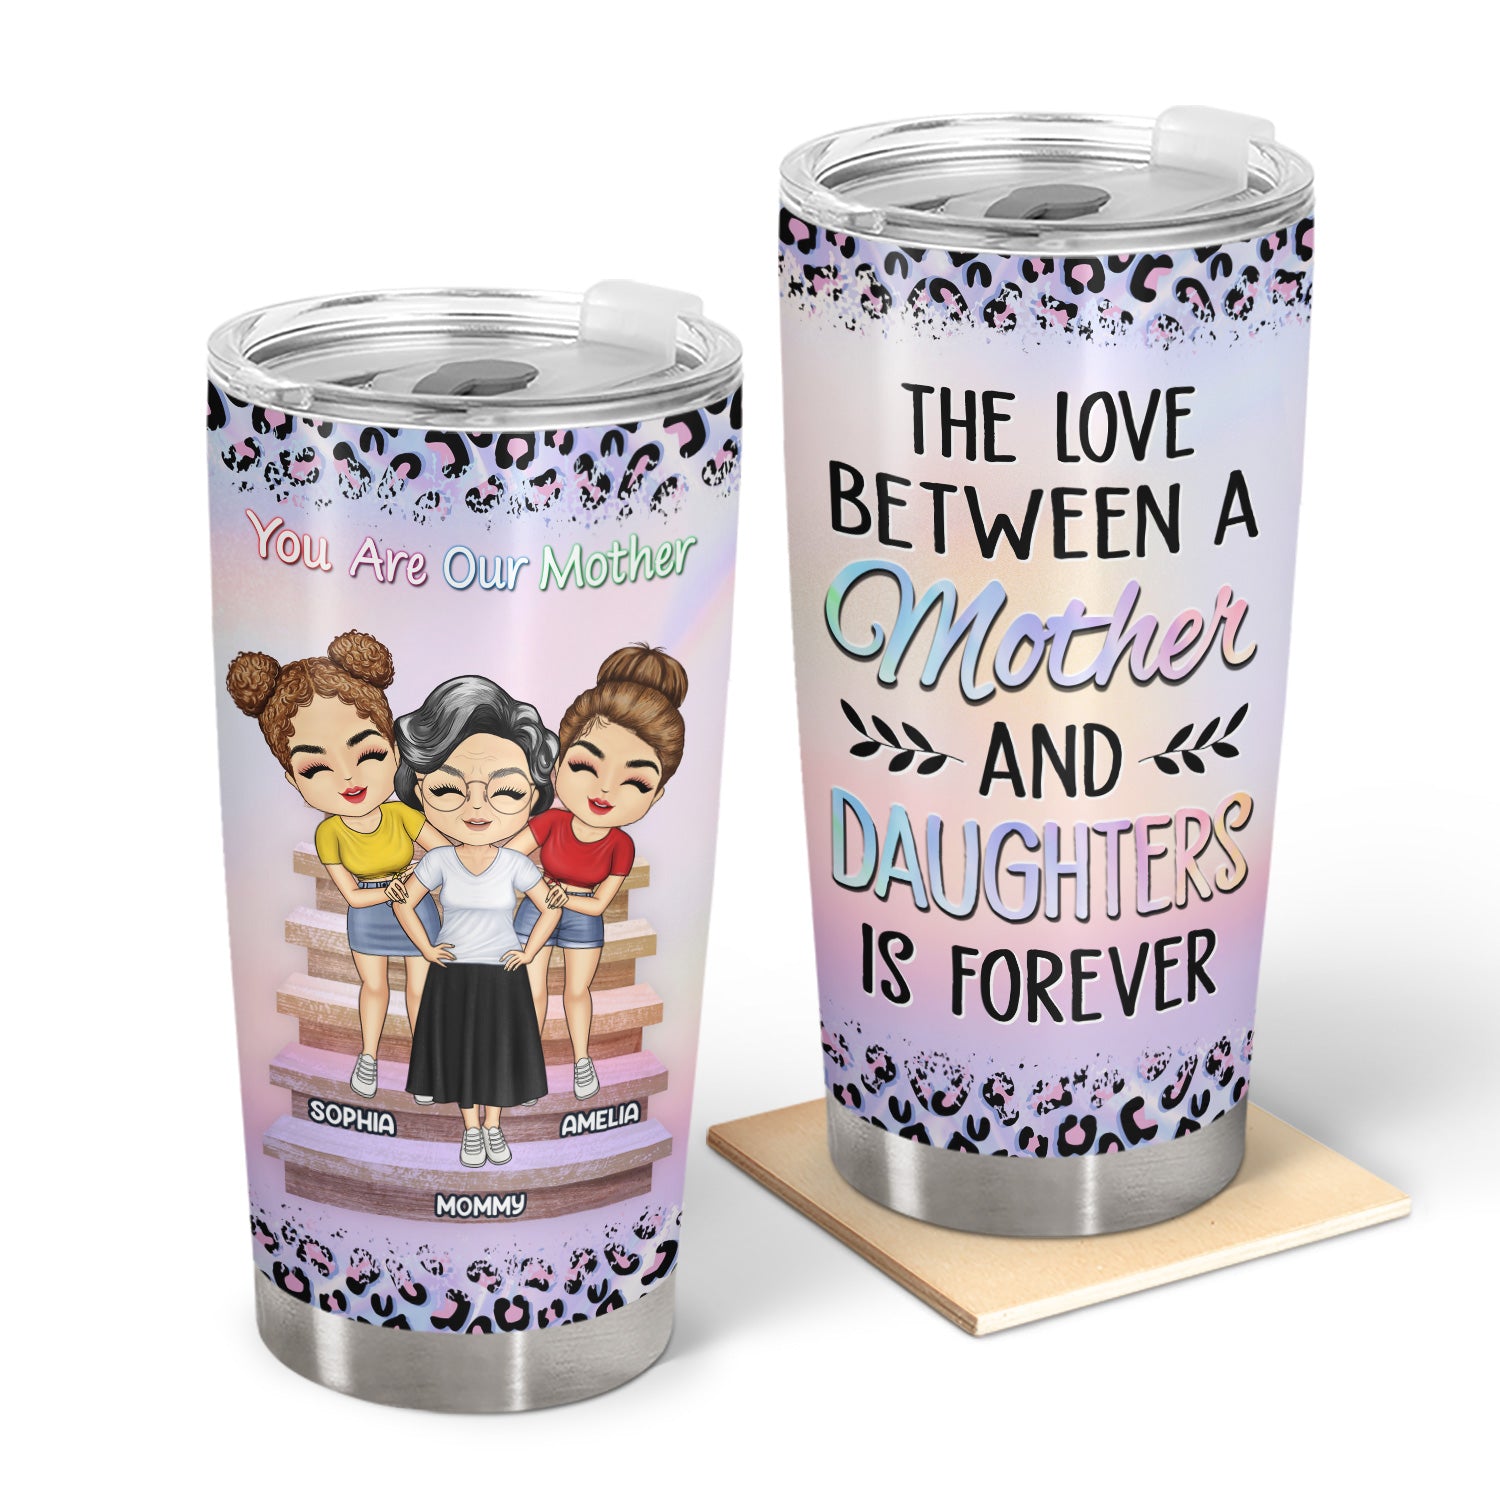 The Love Between A Mother & Daughters Is Forever - Birthday, Loving Gift For Mommy, Mother, Grandma, Grandmother - Personalized Custom Tumbler